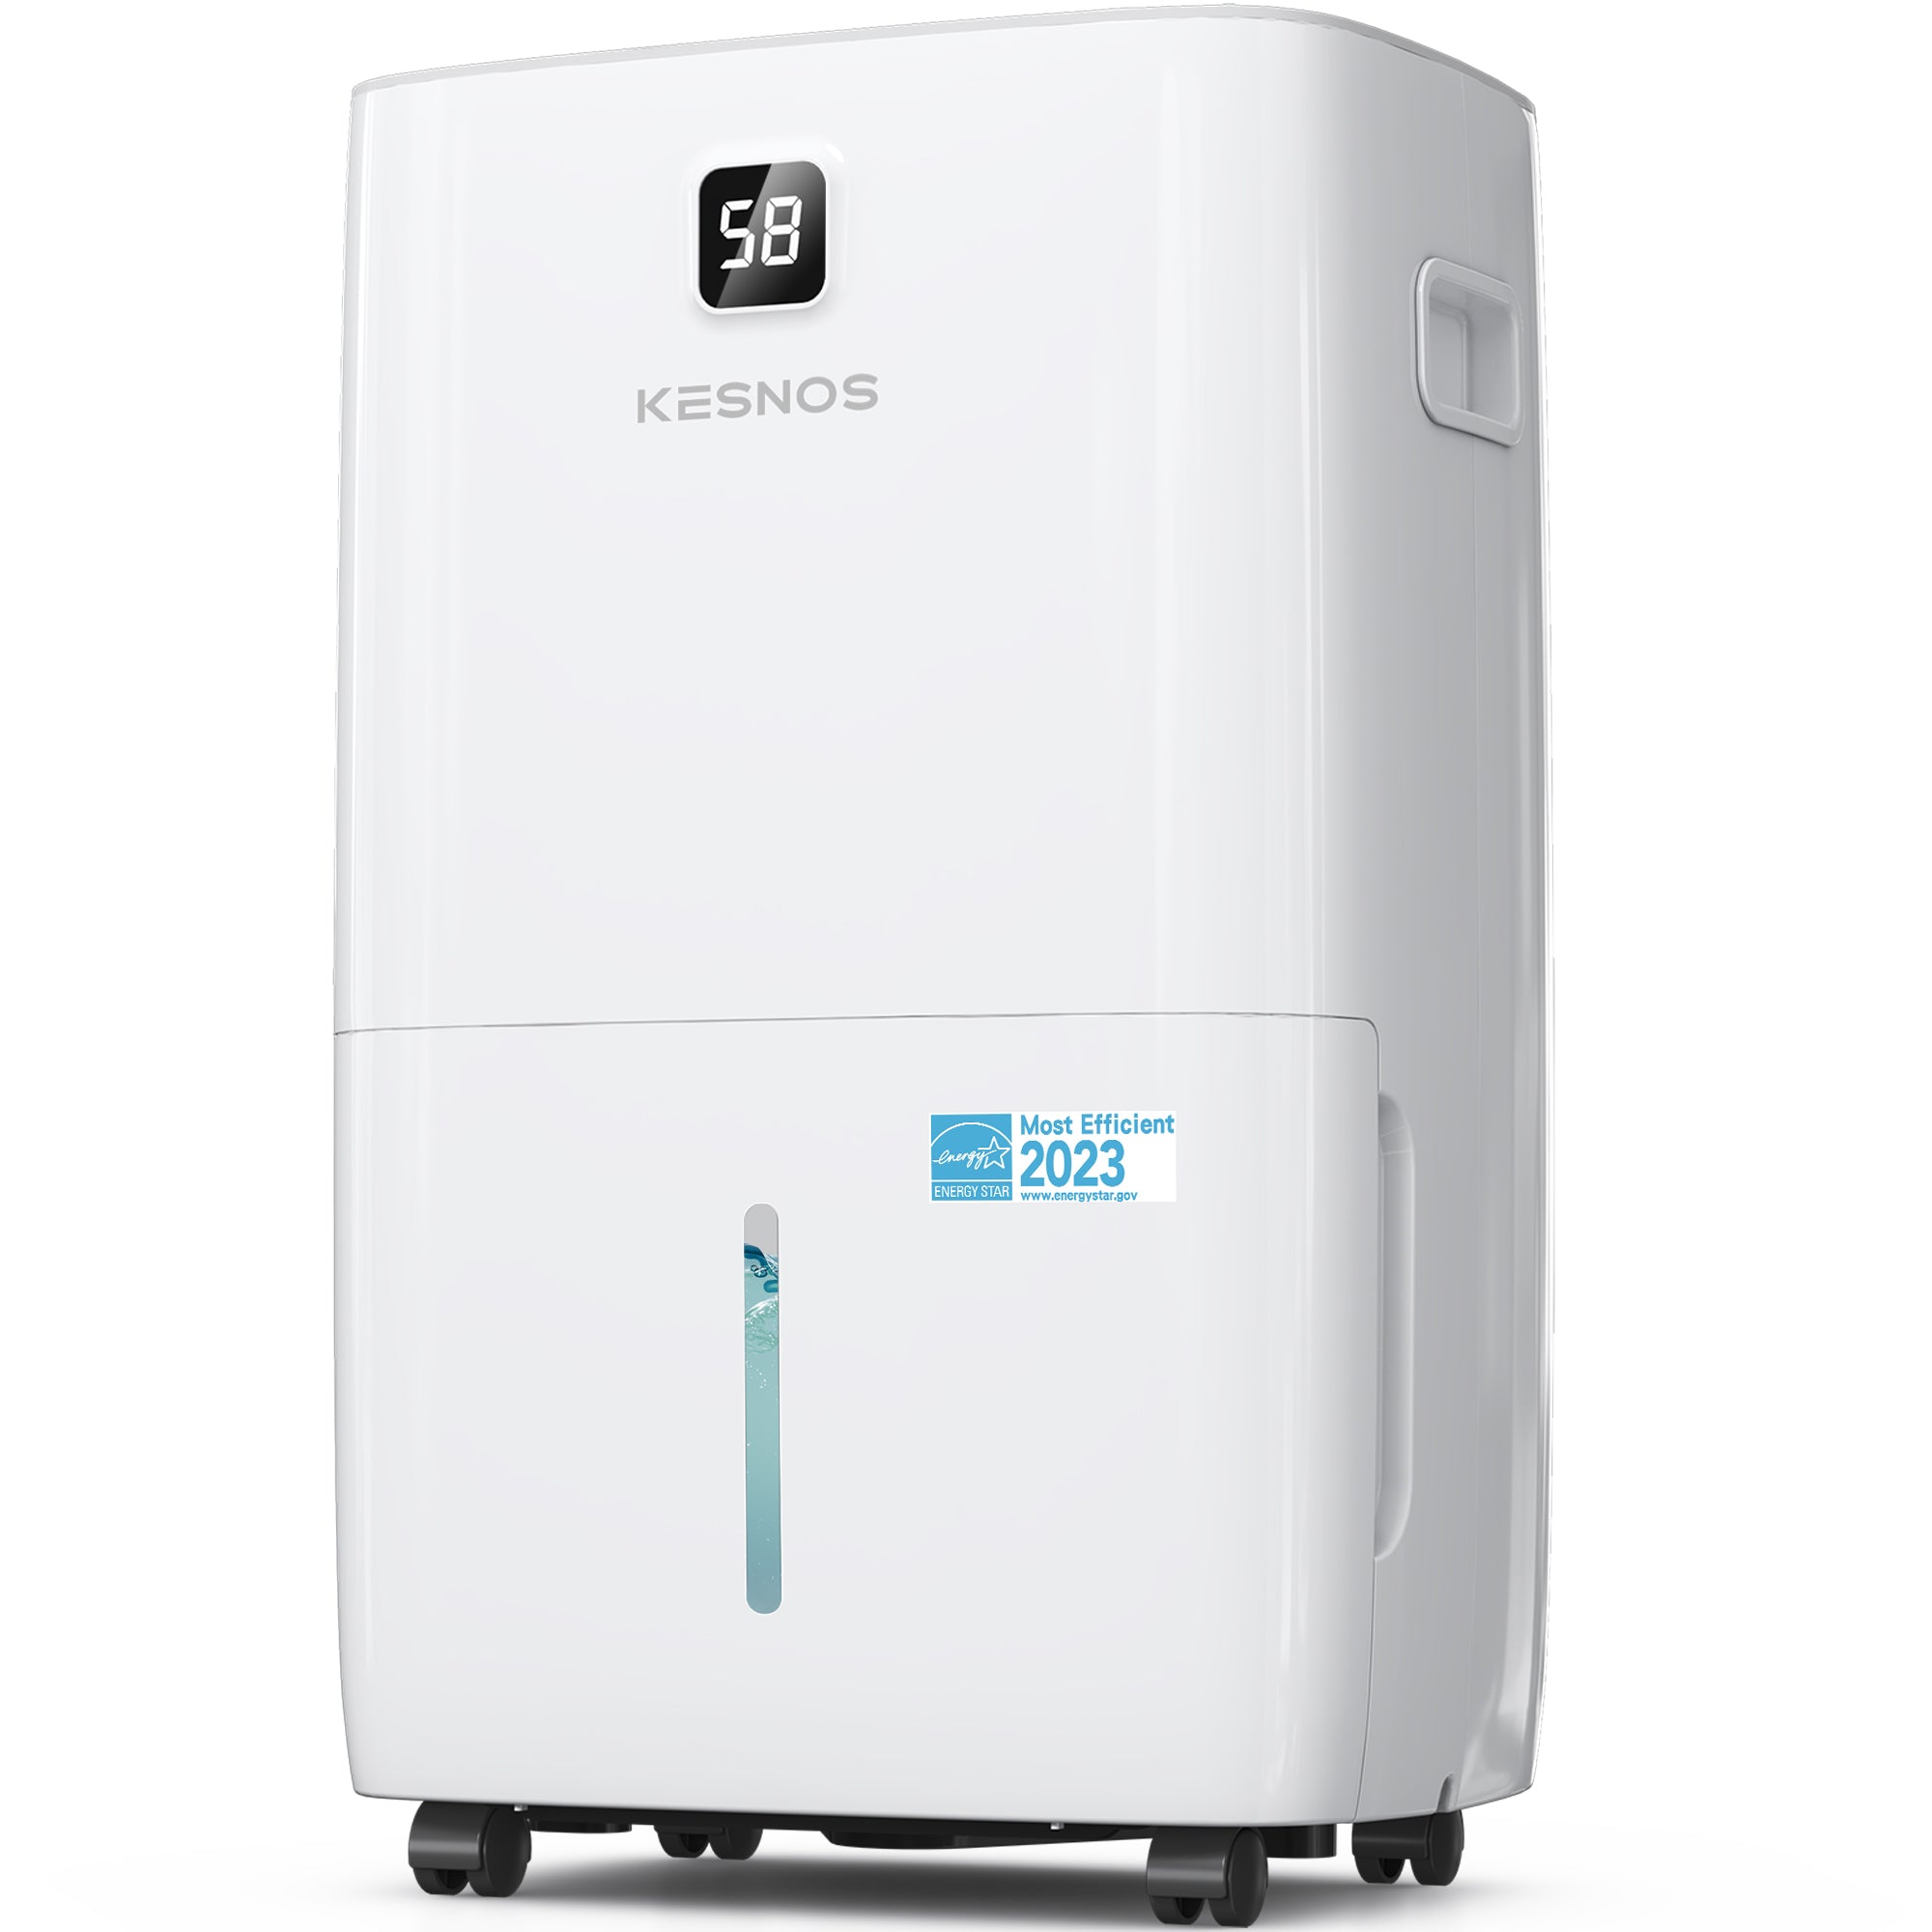 Kesnos 150 Pints Home Dehumidifier Energy Star Most Efficient 2023 for